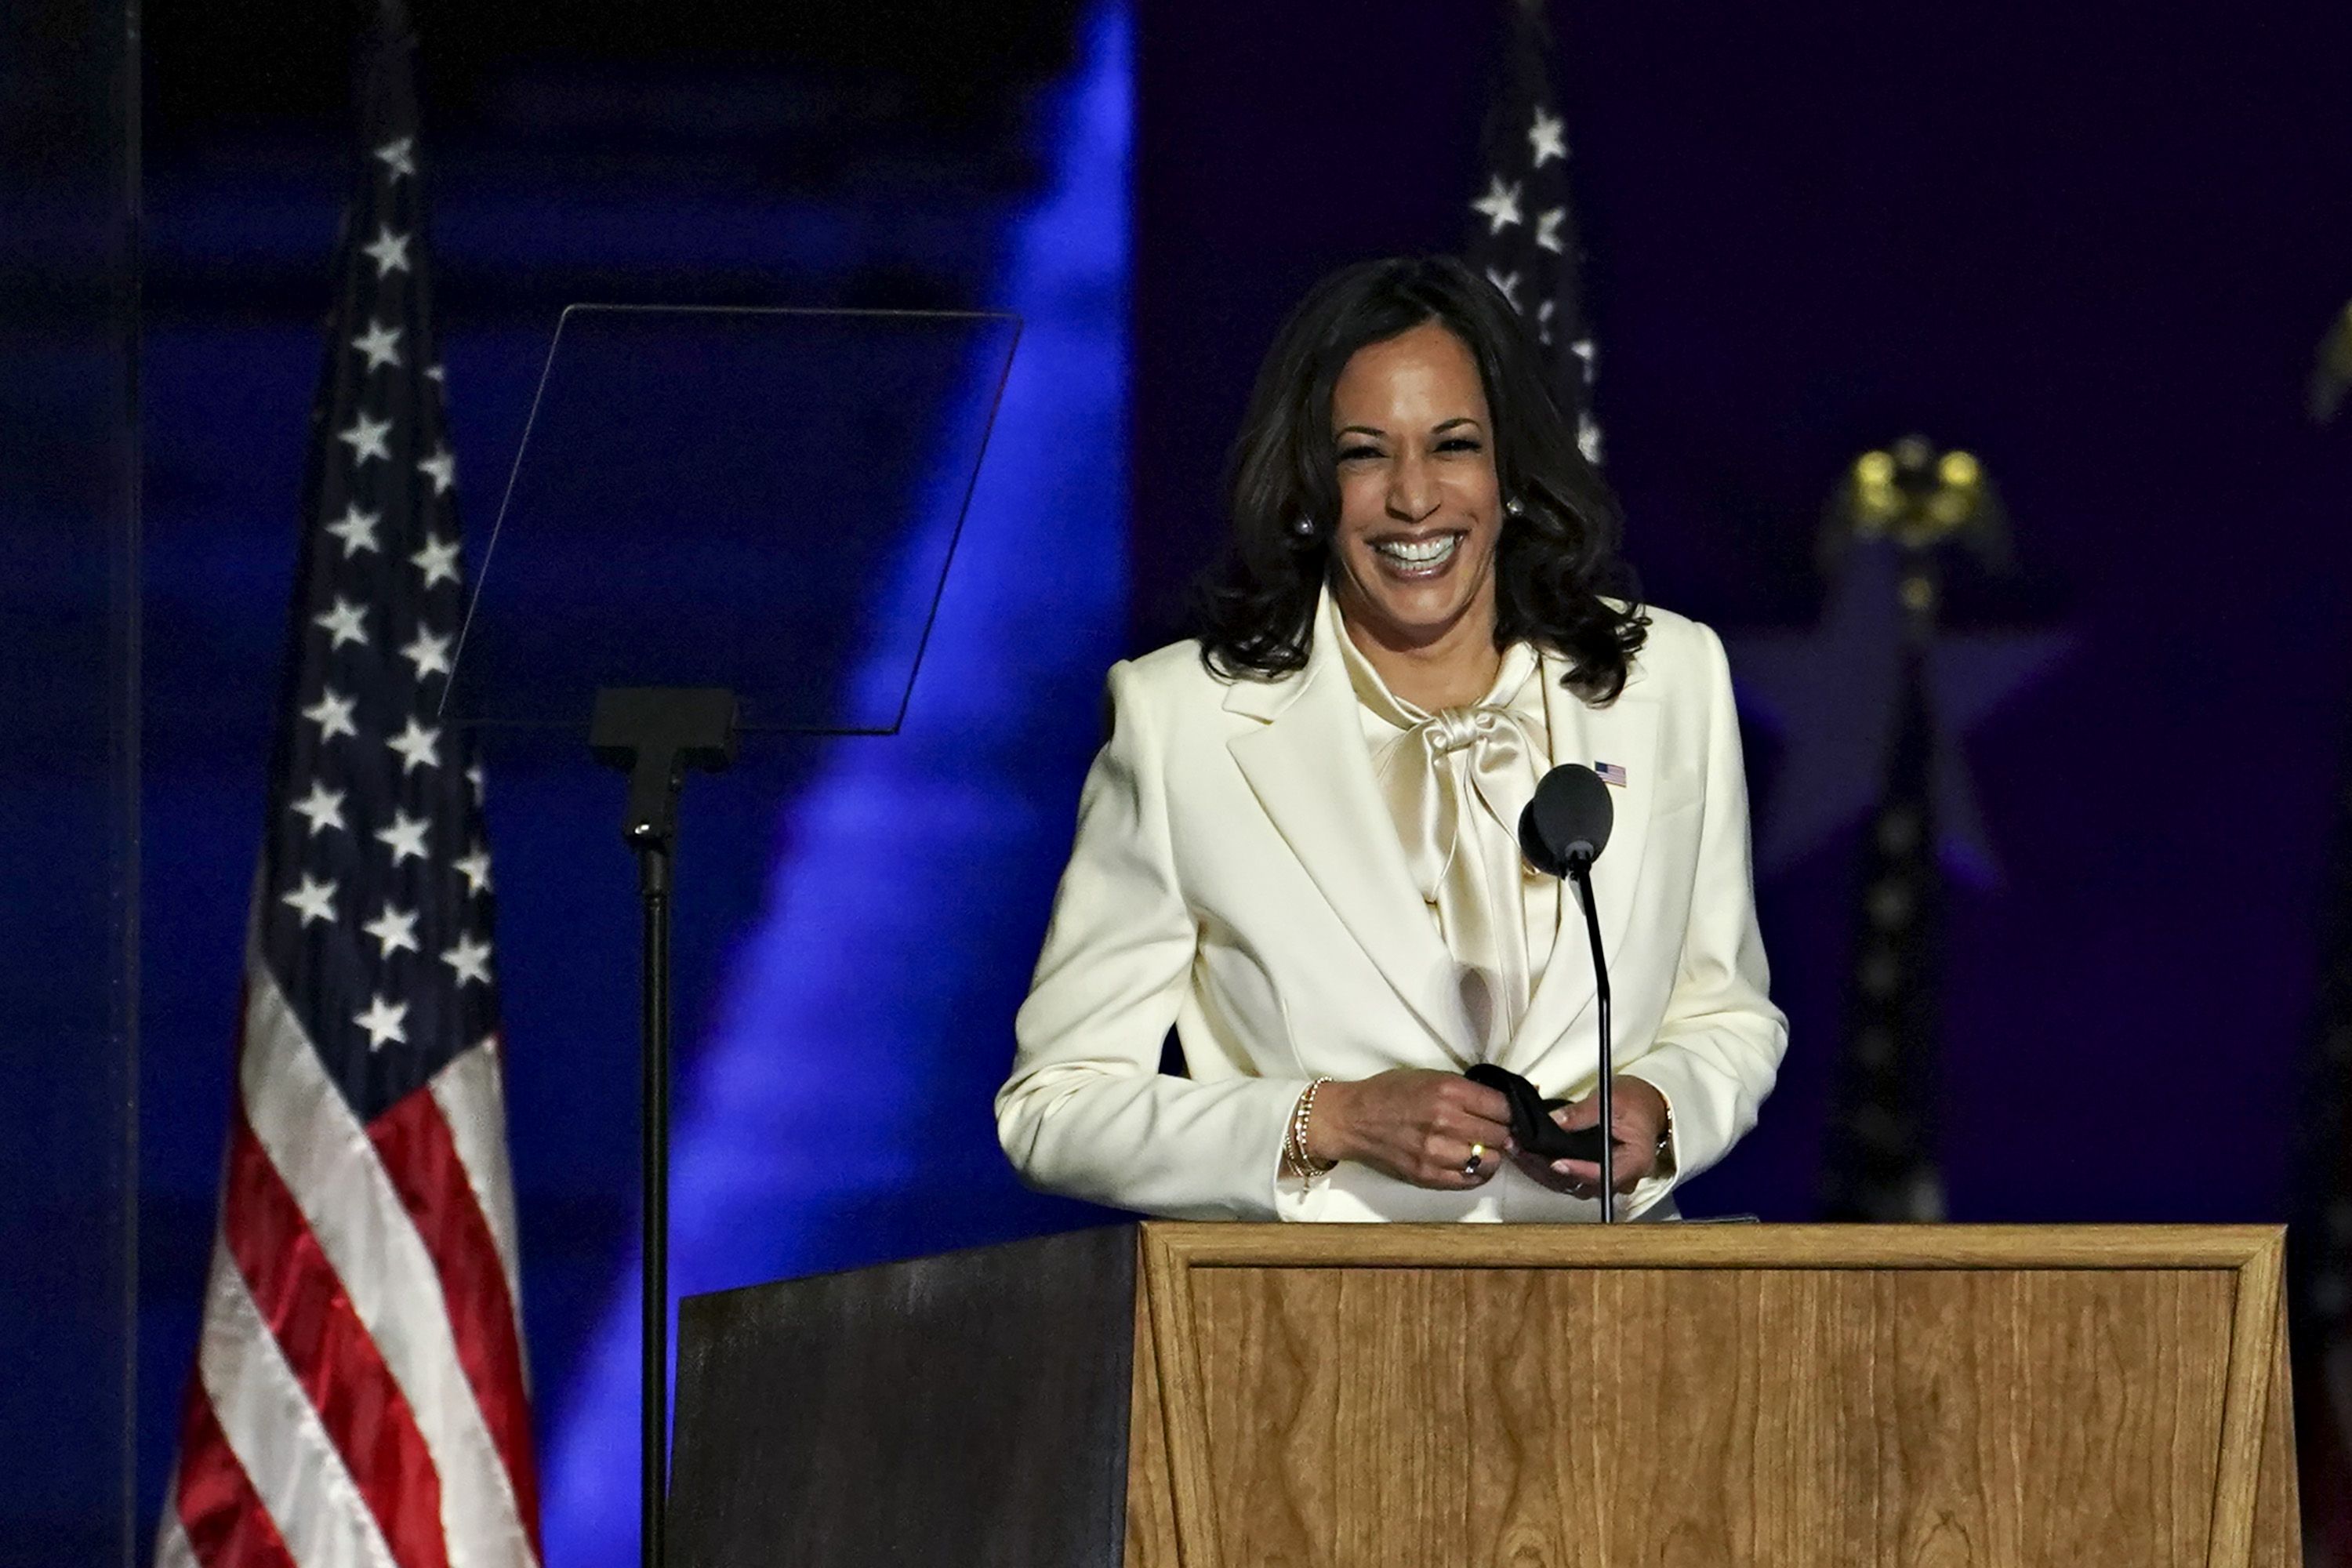 Kamala Harris delivered her first speech as US vice president-elect on Saturday night in an all-white suit, paying homage to suffragettes of the 20th century who worked to get women the right to vote in the United States.